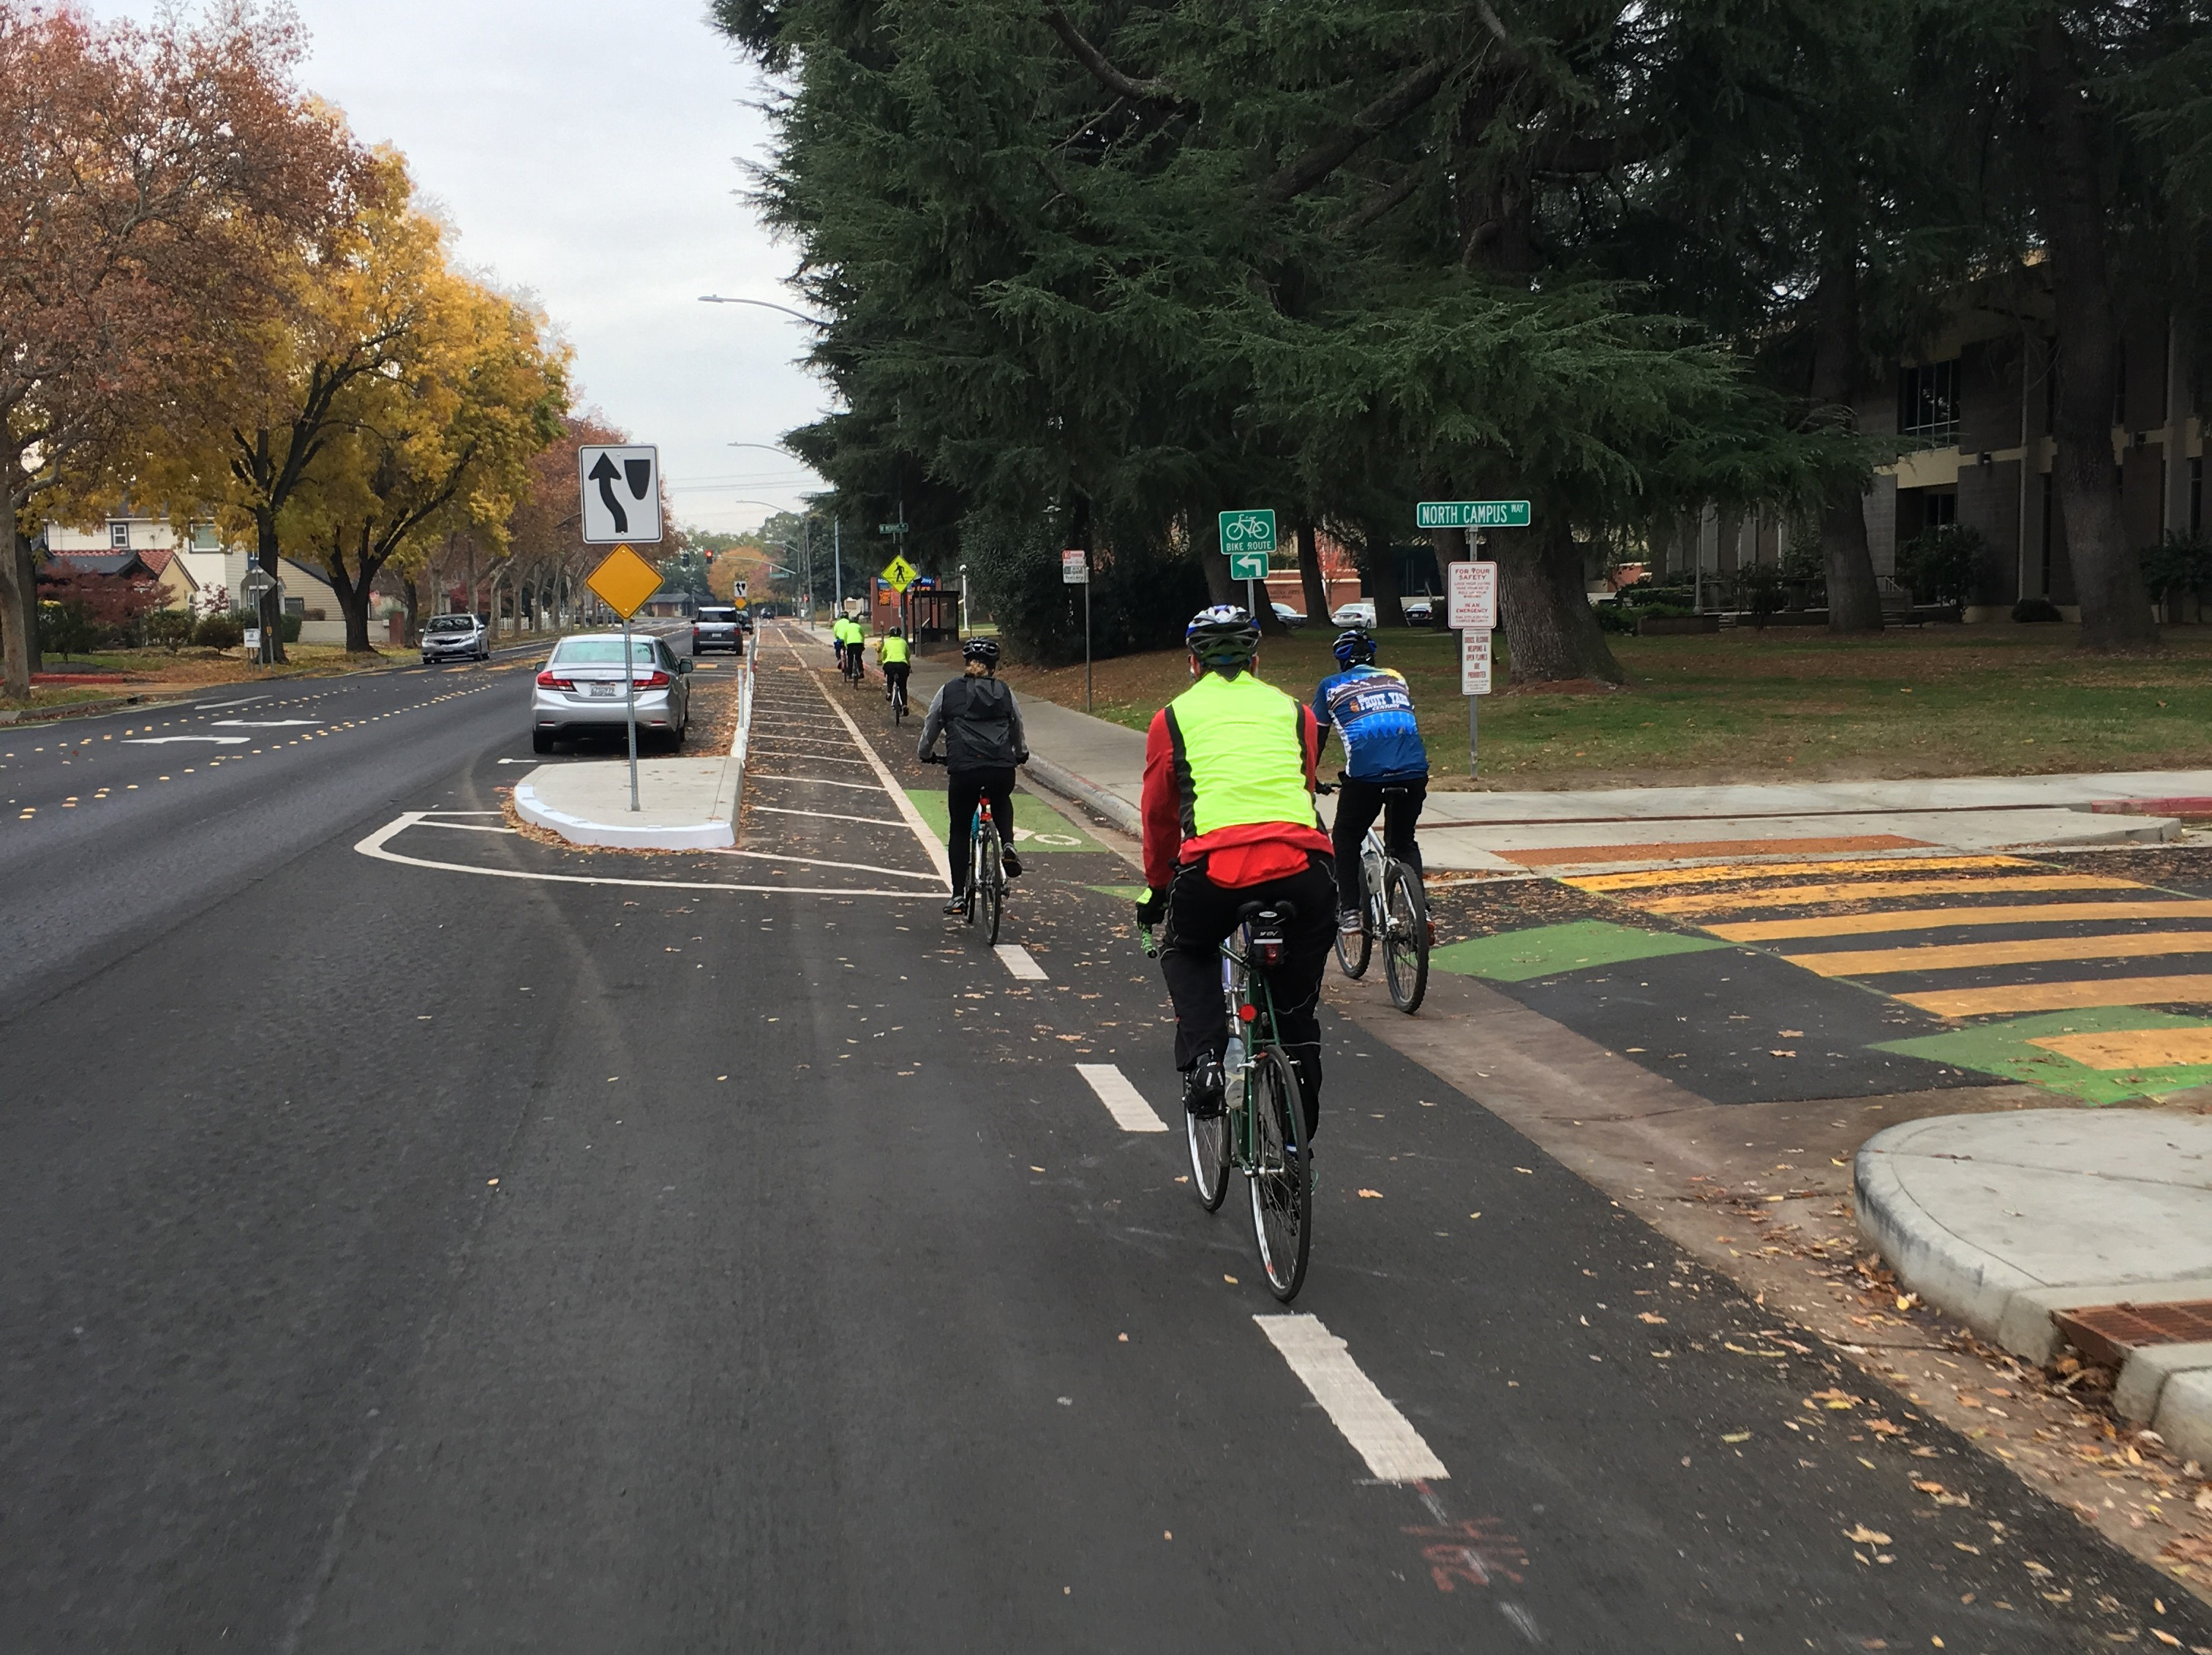 Riders enter the new parking-protected bike lane along XX Ave. Photo: Michael Sacuskie